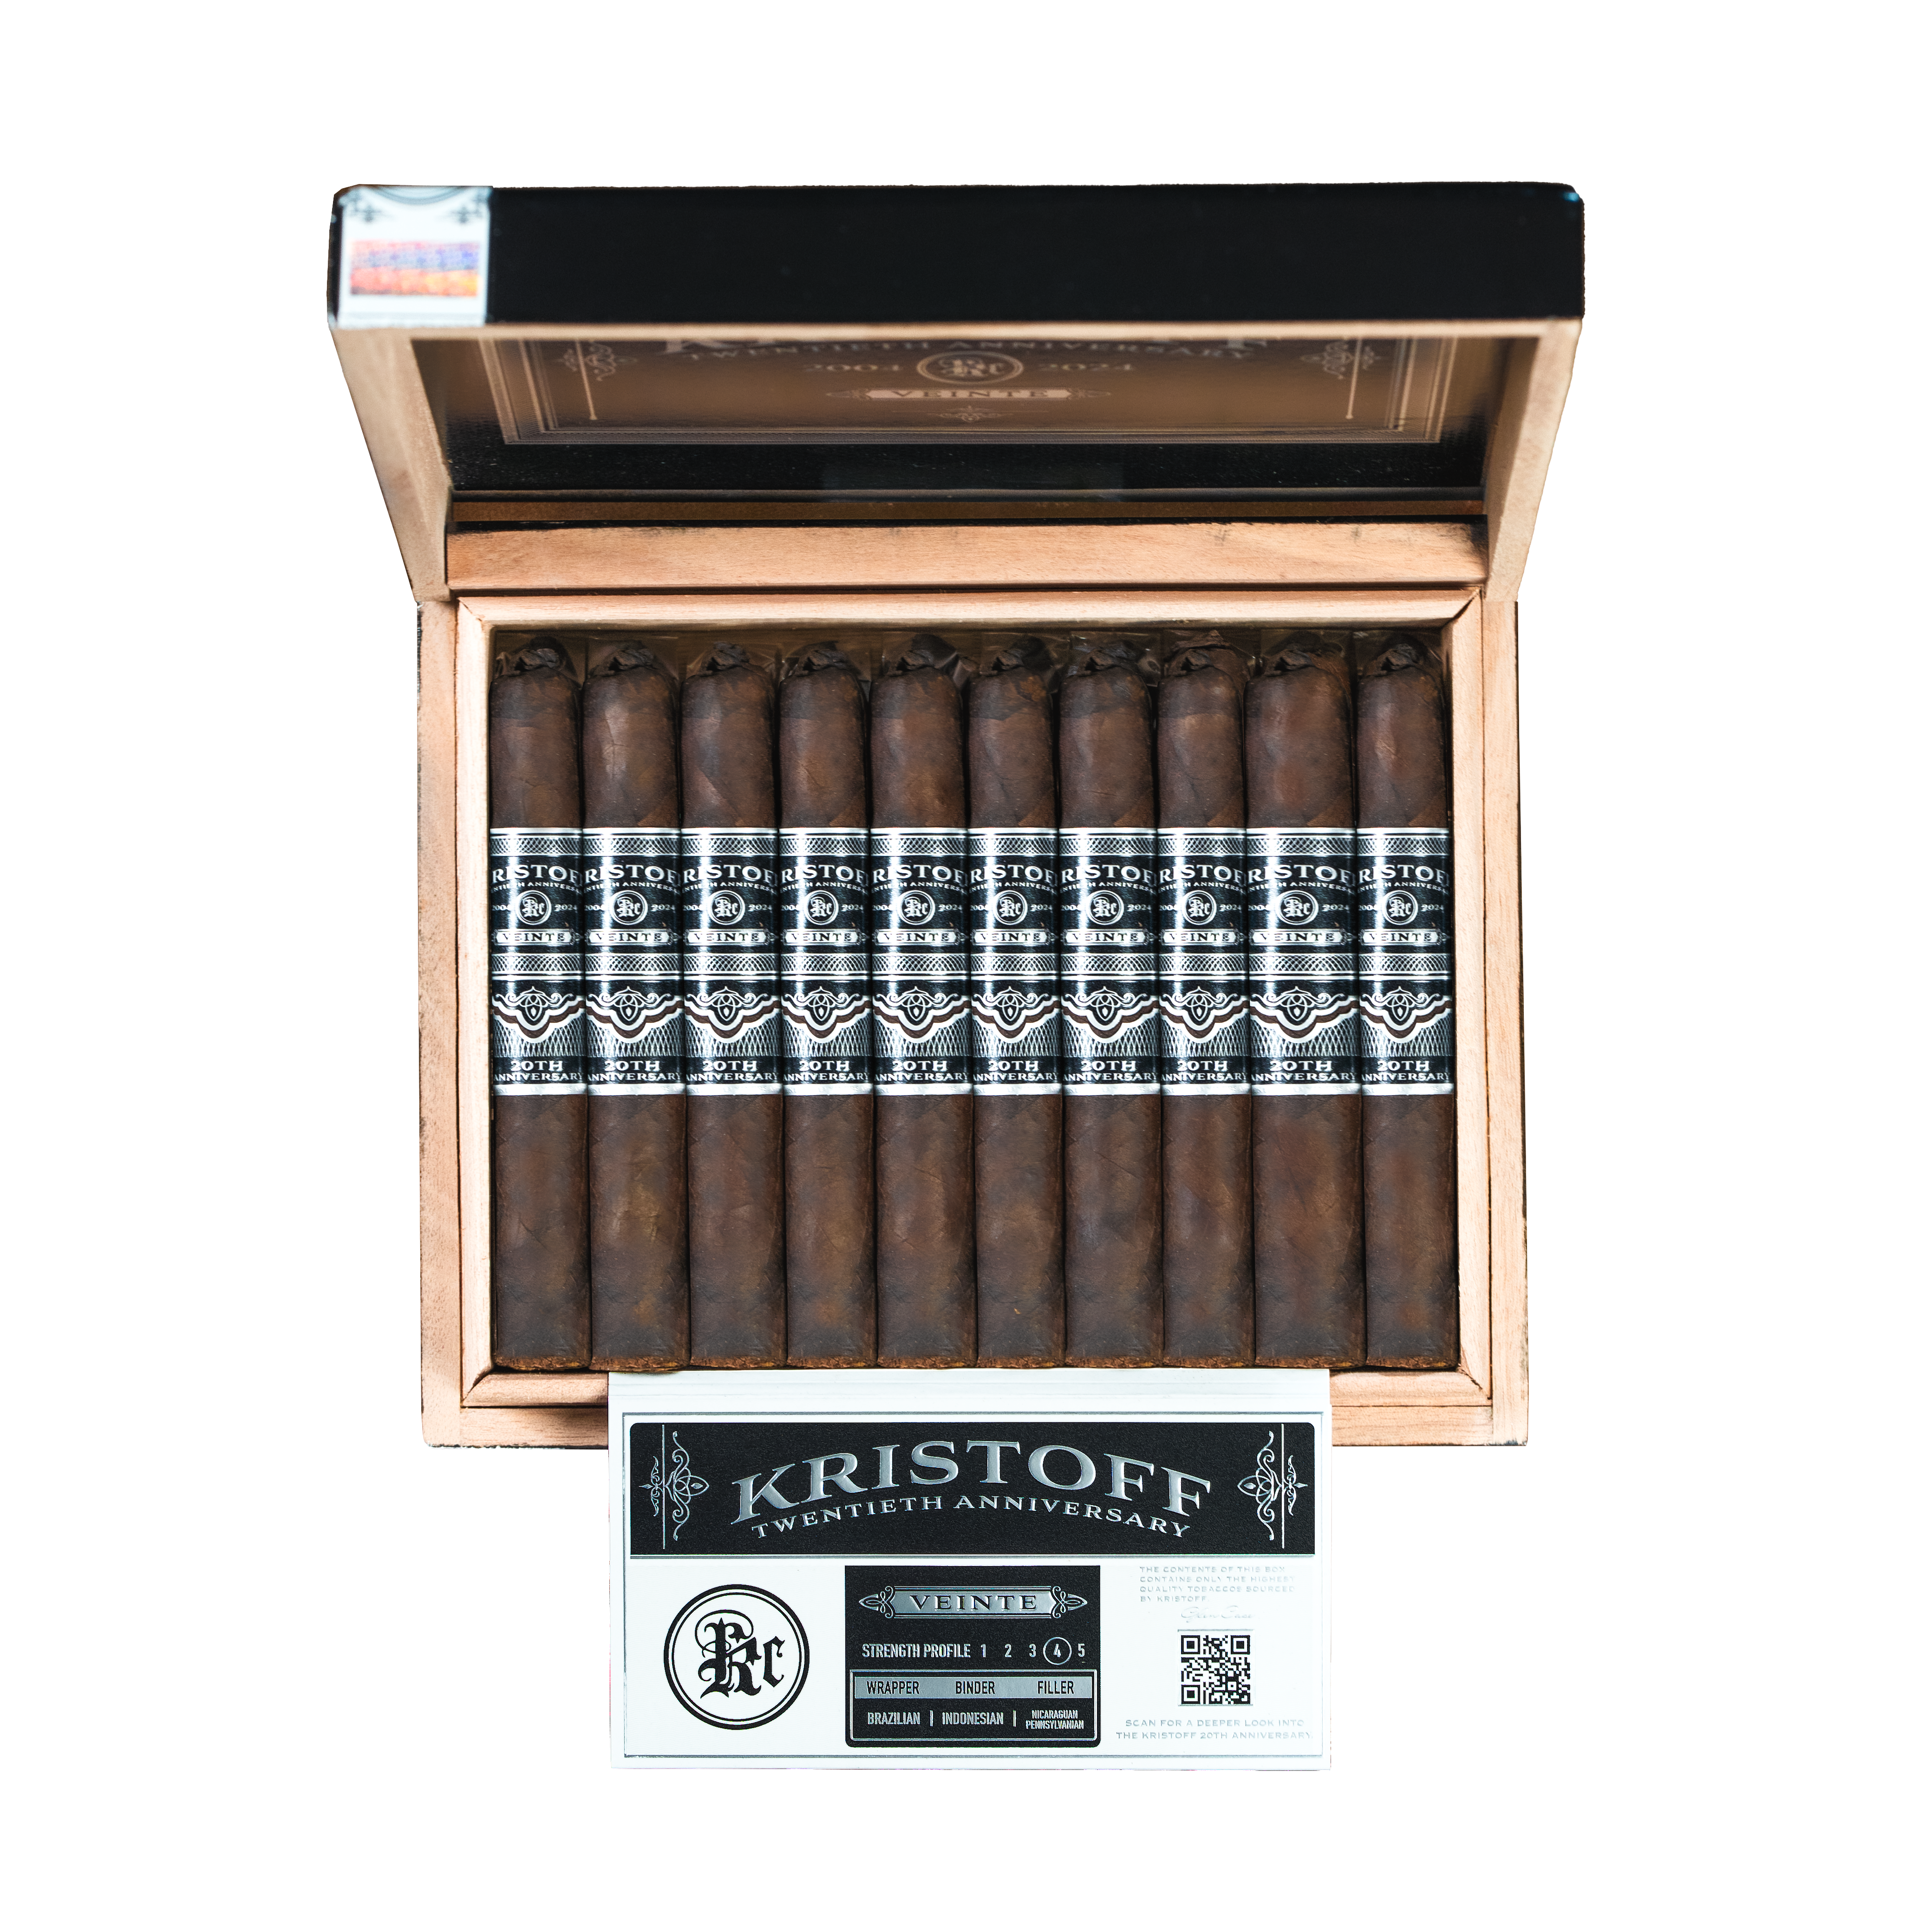 Kristoff Cigars: Kristoff Veinte celebrates 20 years of Kristoff Cigars, featuring creamy chocolate, spices, brown sugar, and a rich roast coffee finish.